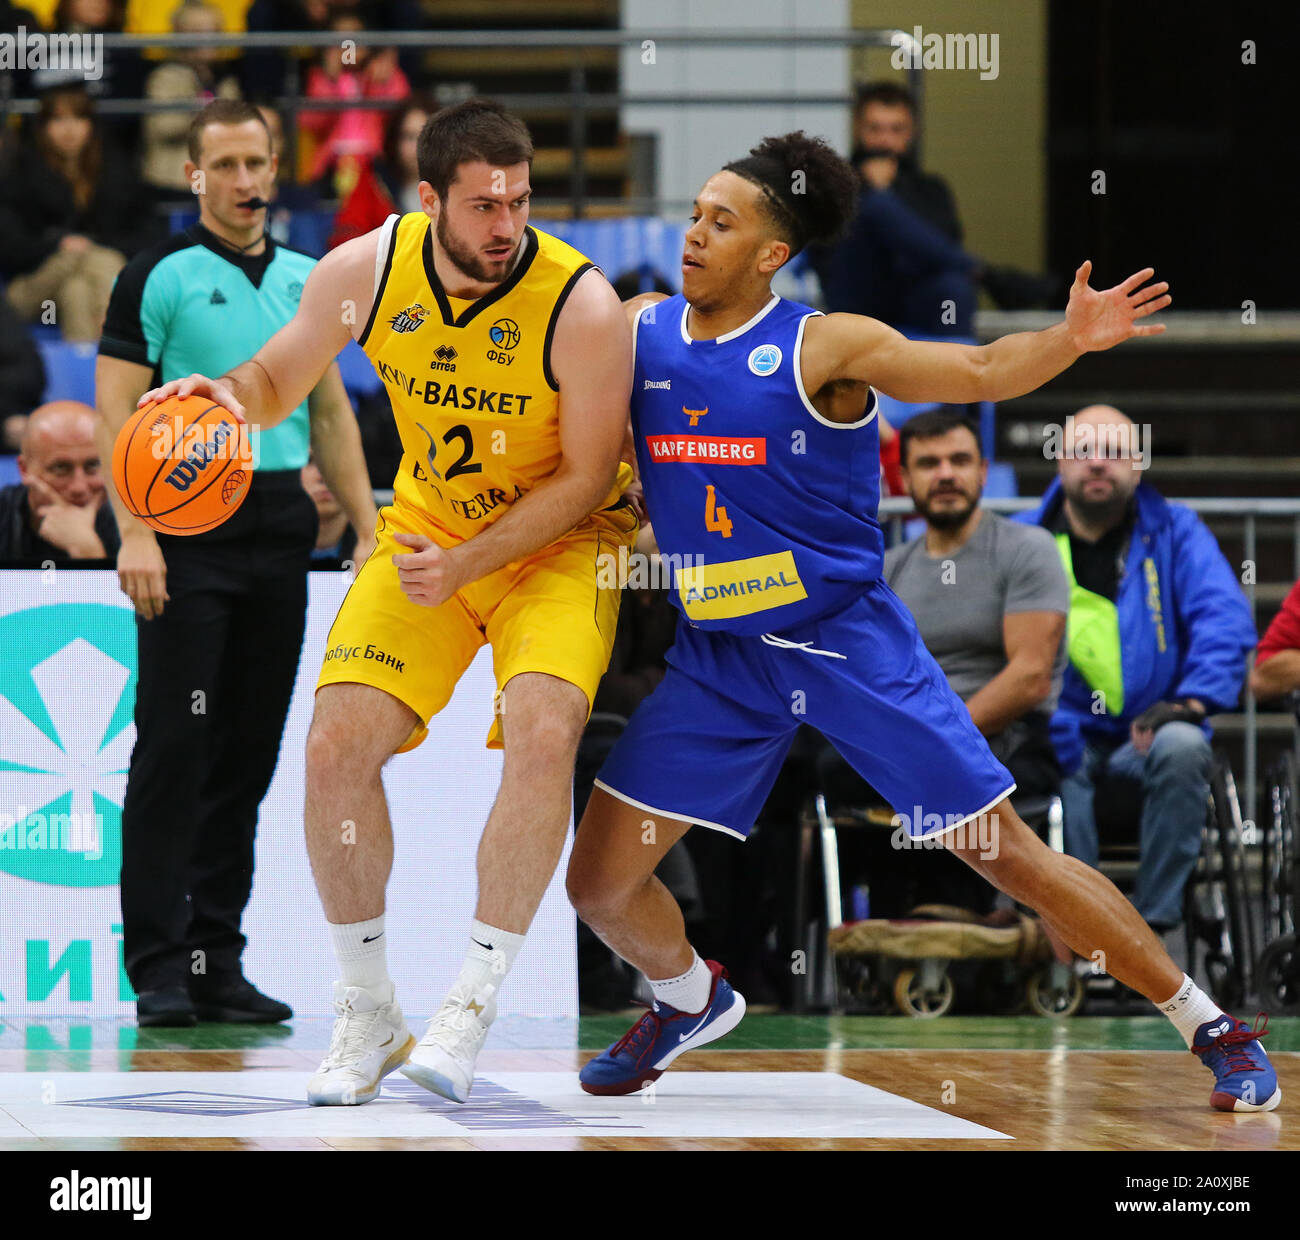 KYIV, UKRAINE - SEPTEMBER 20, 2019: Viacheslav Petrov of BC Kyiv Basket (L)  and Keenan Nathanial Gumbs of Kapfenberg Bulls in action during their FIBA Basketball  Champions League Qualifiers game Stock Photo - Alamy